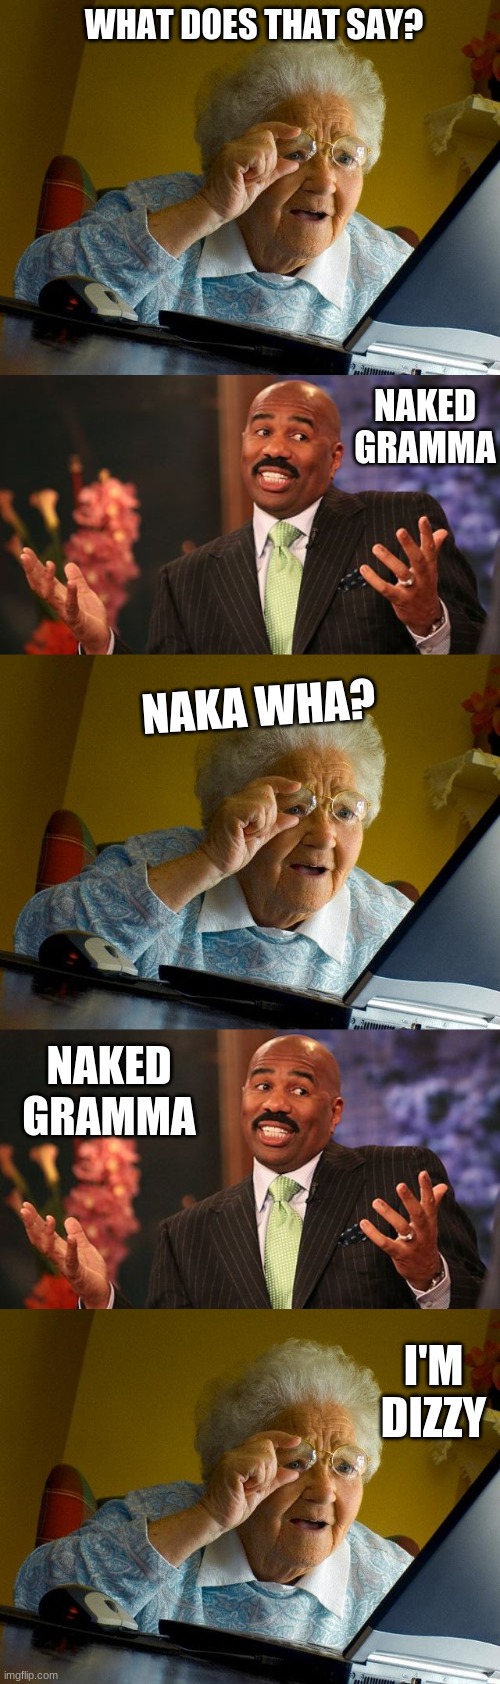  WHAT DOES THAT SAY? NAKED GRAMMA; NAKA WHA? NAKED GRAMMA; I'M DIZZY | image tagged in memes,grandma finds the internet,steve harvey,shrug | made w/ Imgflip meme maker